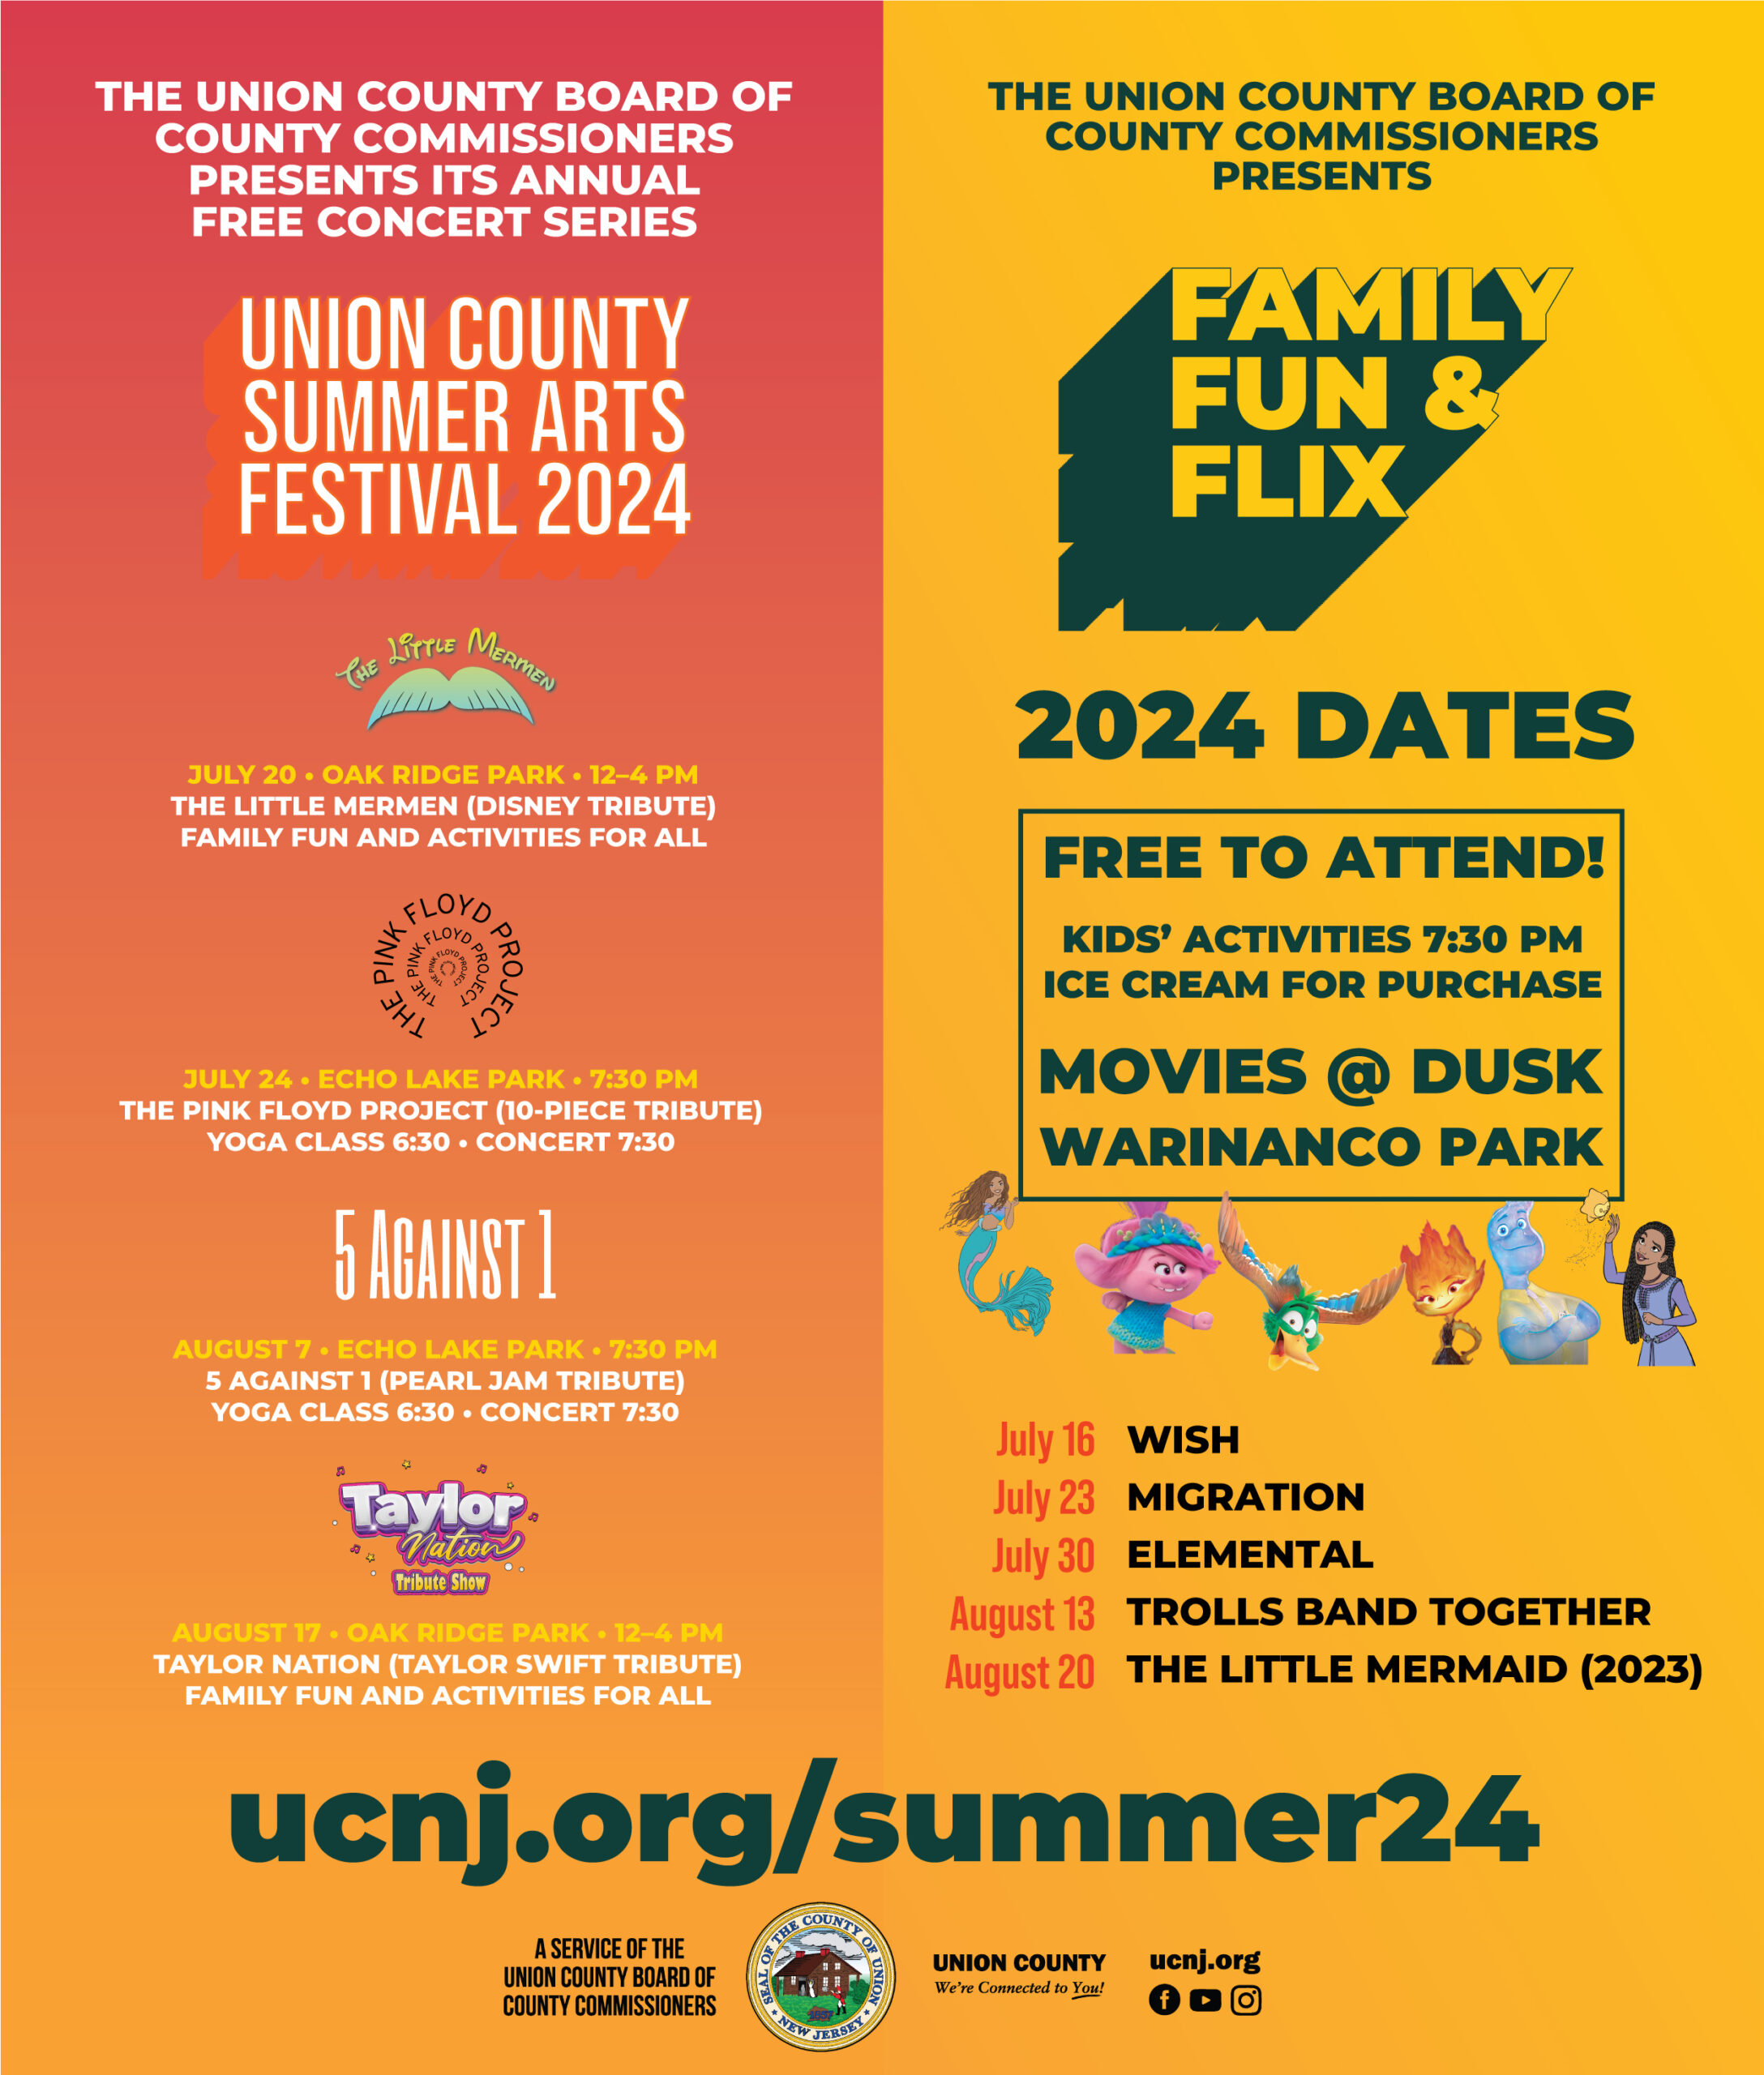 Family Fun and Flix and Summer Arts Concert Series Return to Union County Parks This Summer